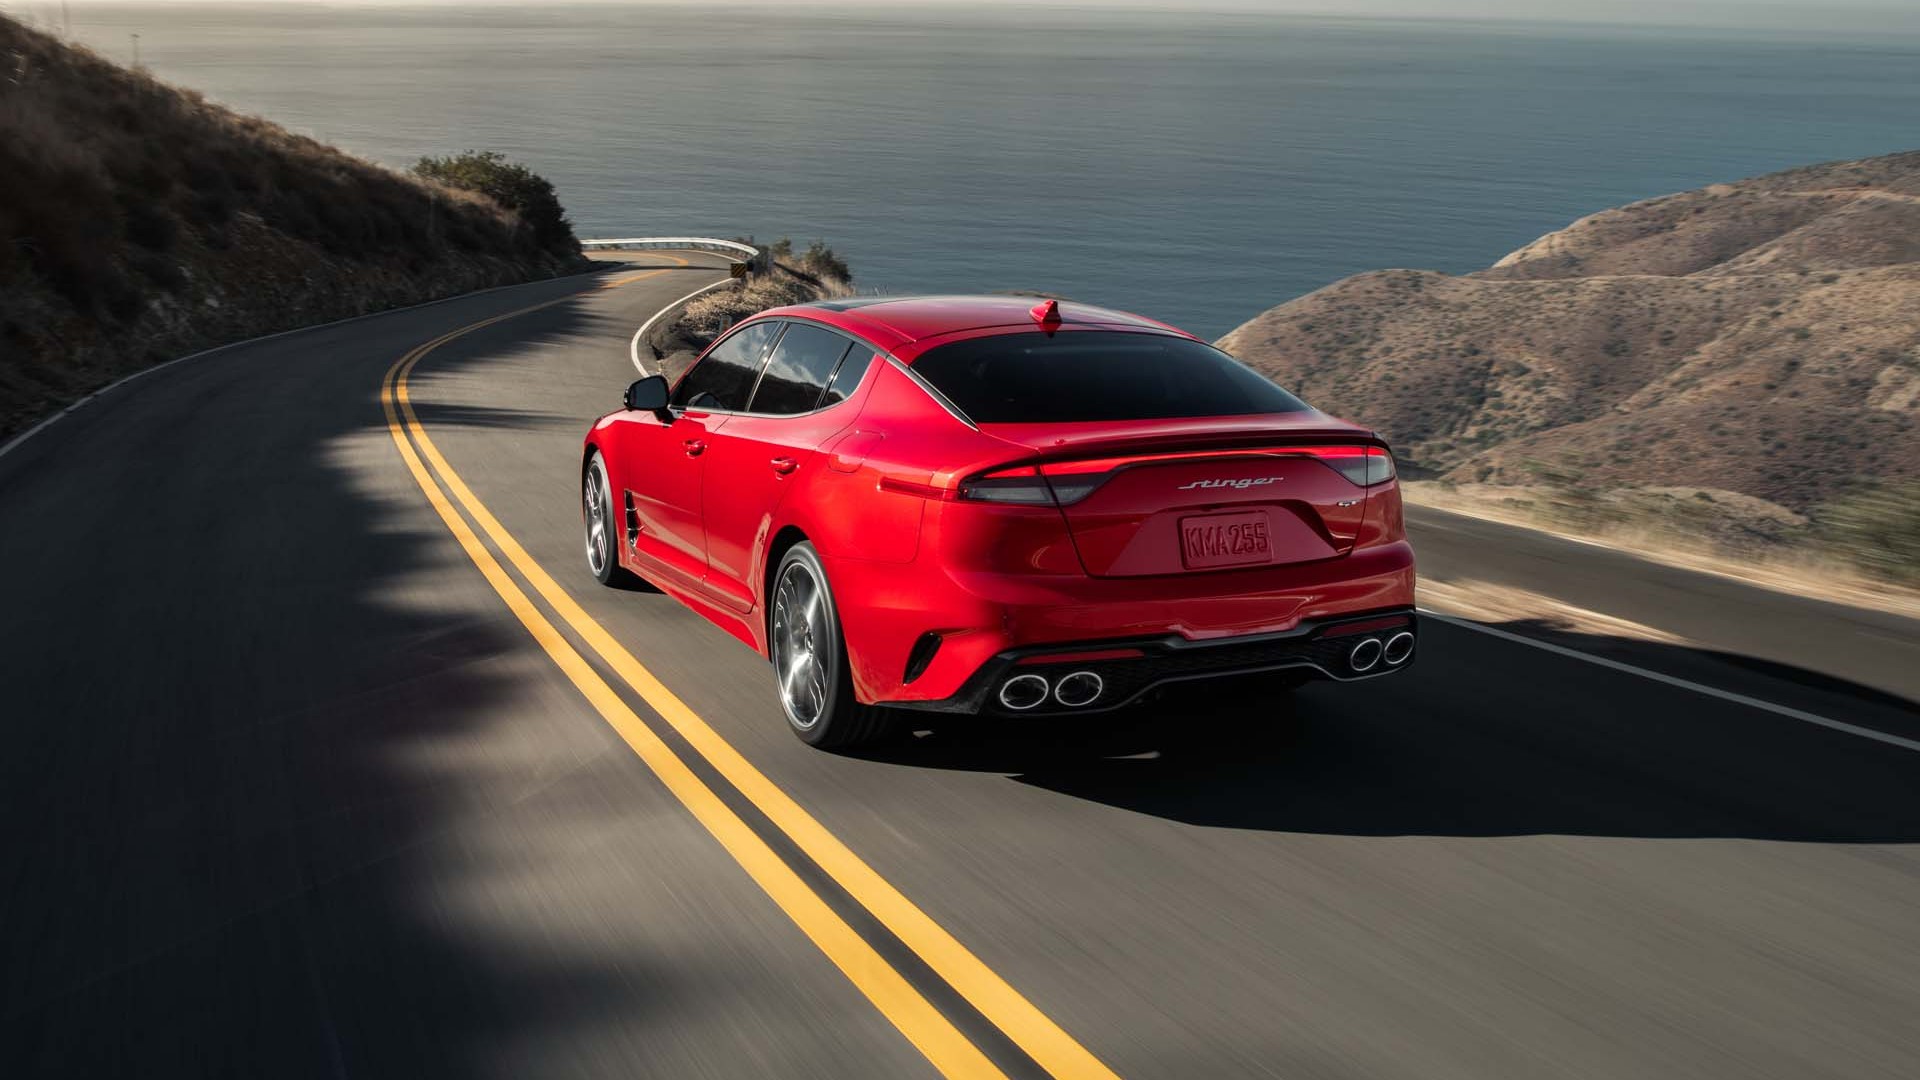 Preview: 2022 Kia Stinger arrives with new looks and 300 hp as standard